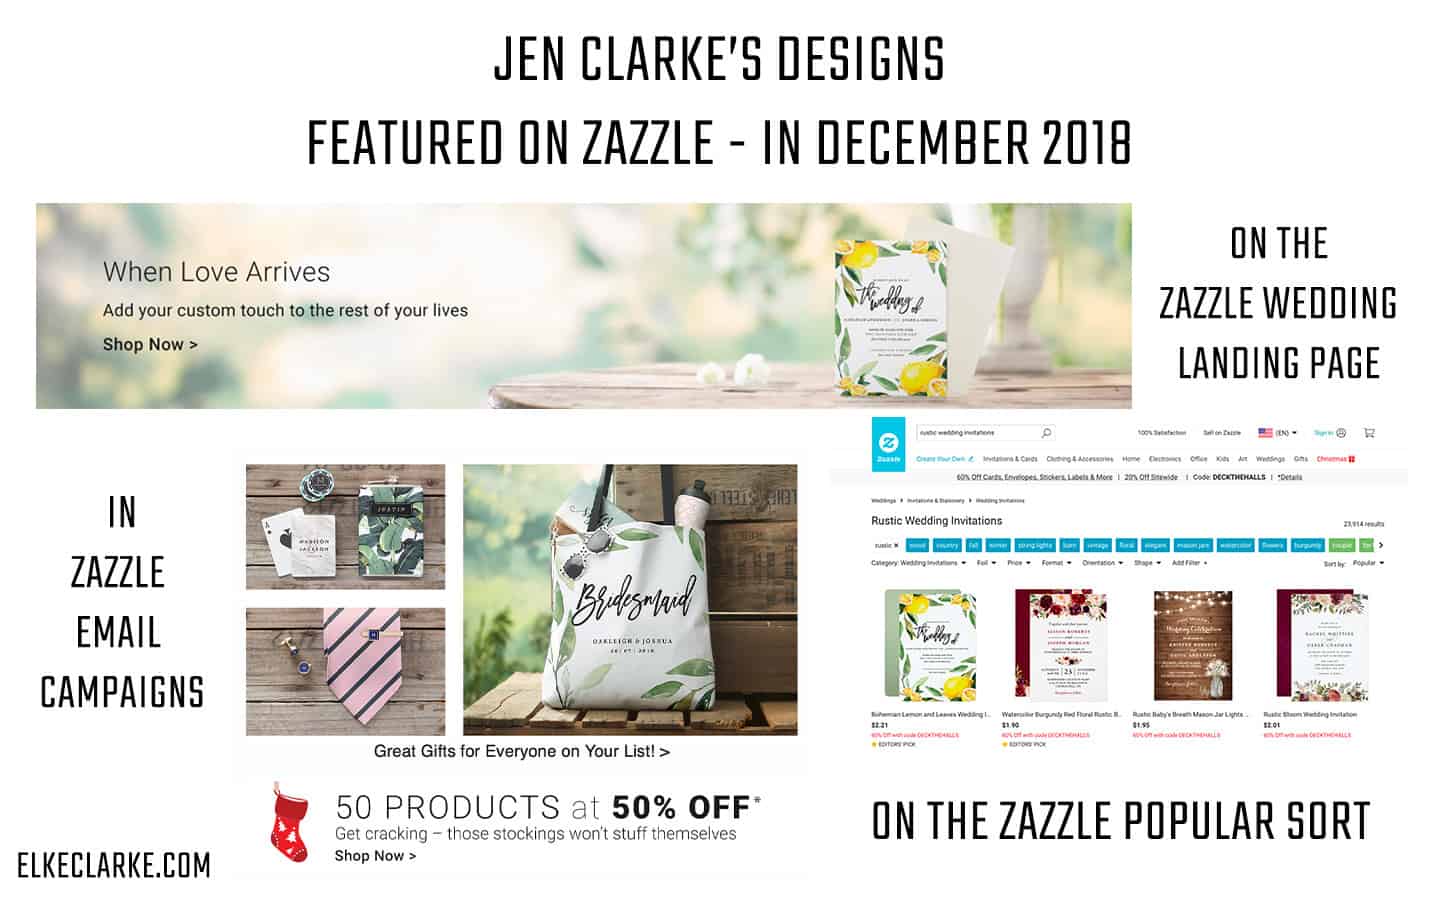 Zazzle design bootcamp: Jen clarke designs have been featured on Zazzle for most of 2018